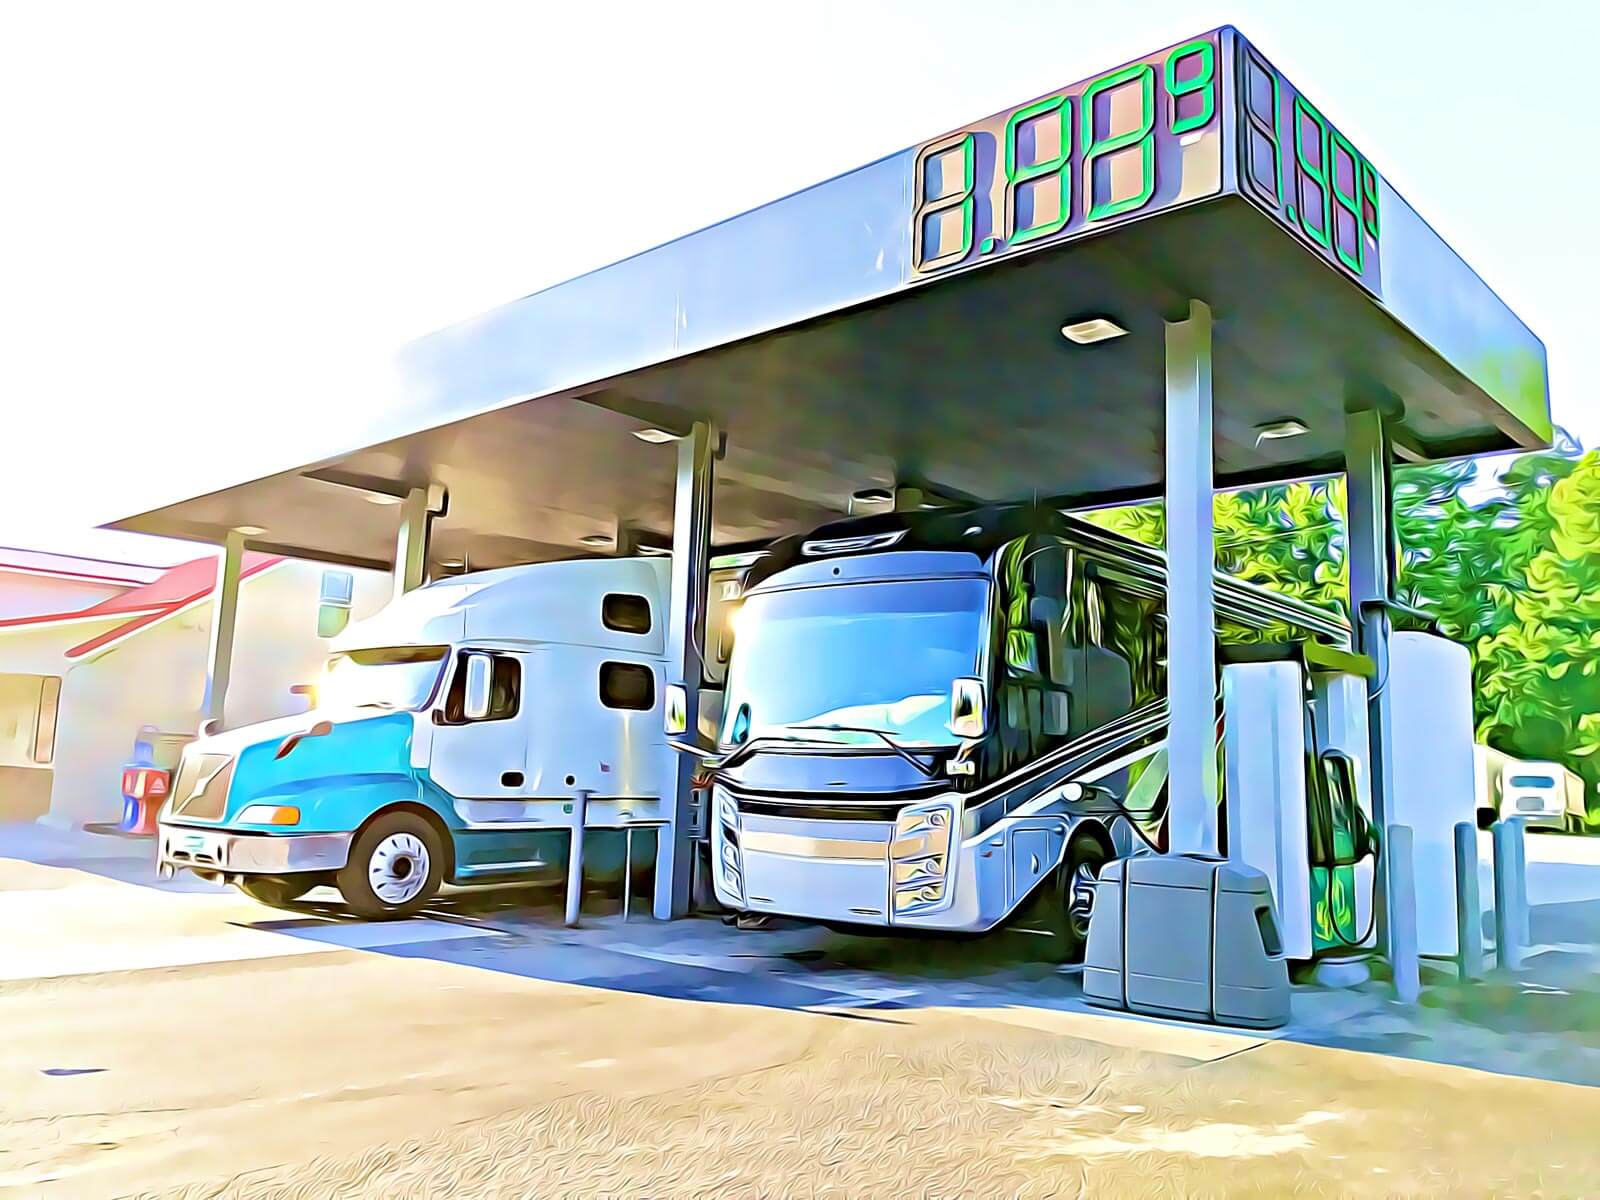 motorhome in trucking lane at a gas station